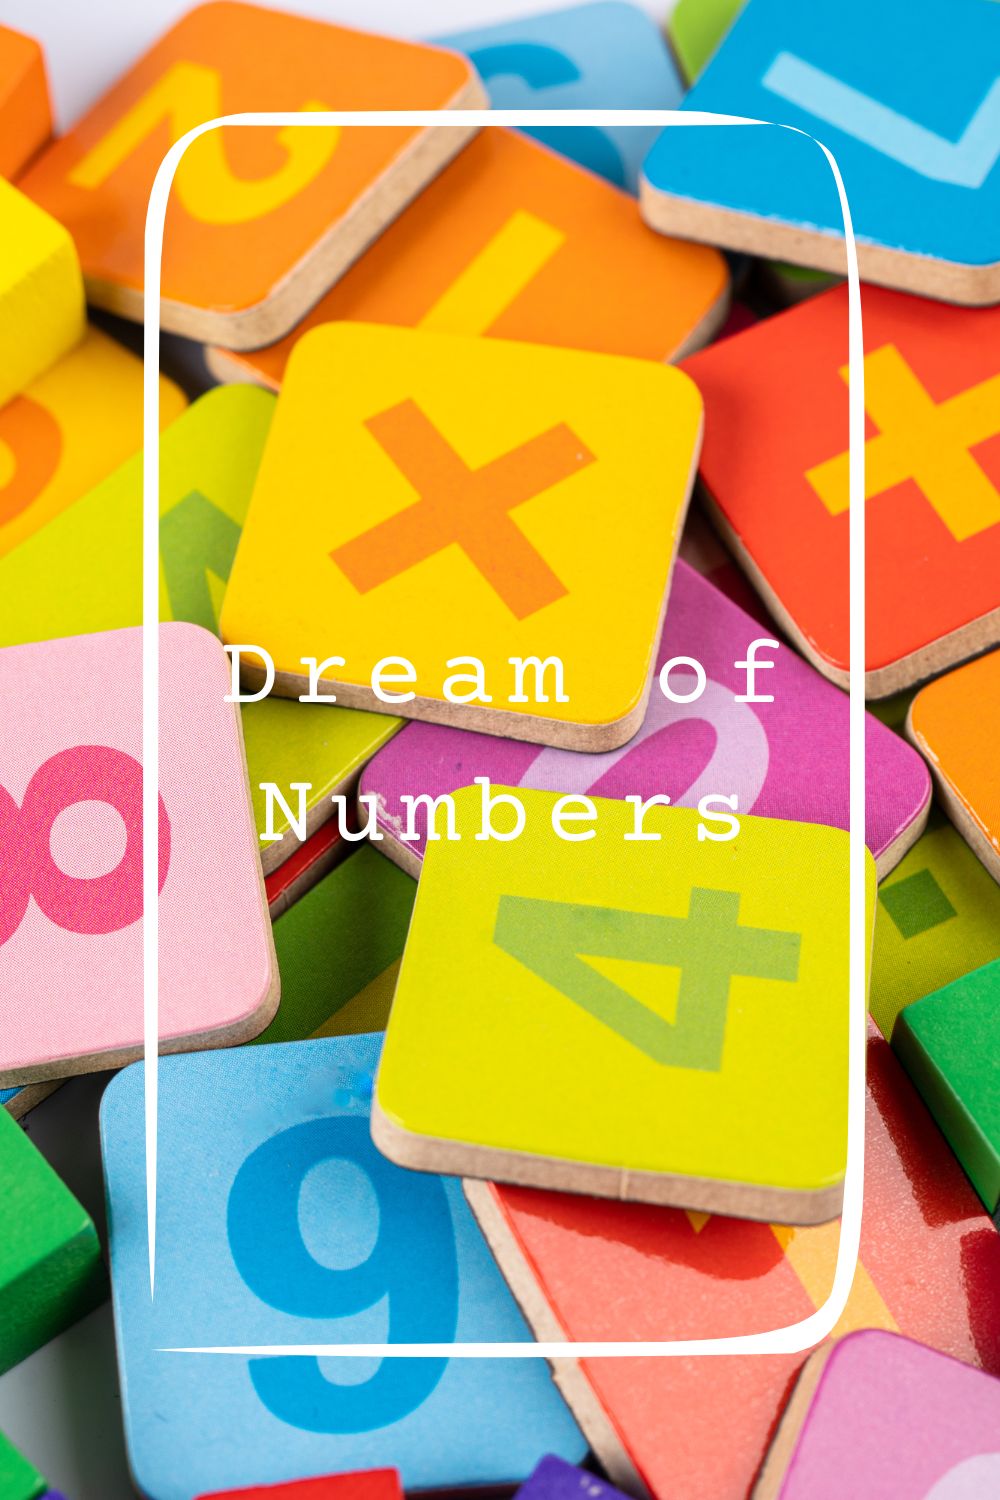 Dream of Numbers1